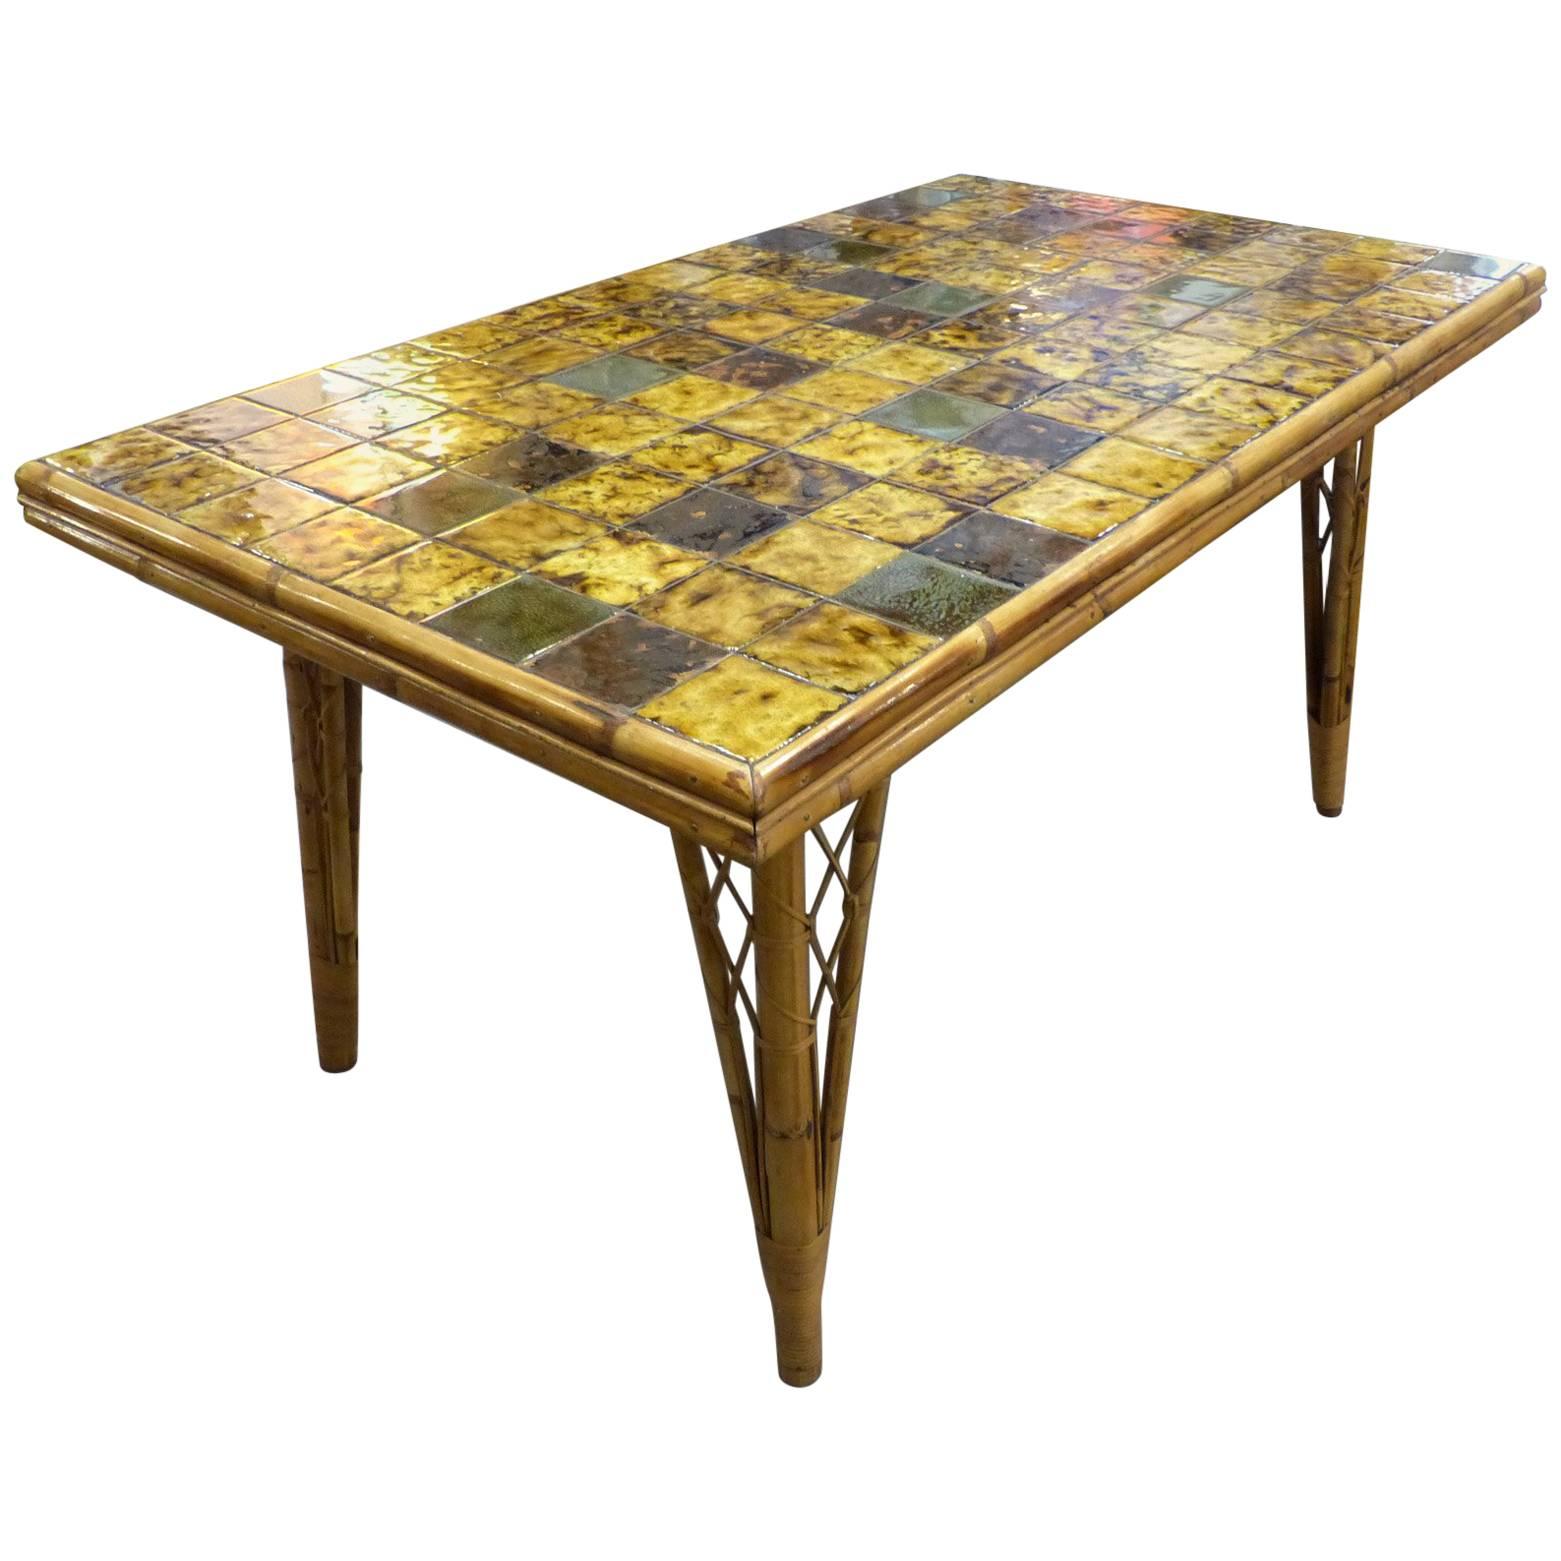 Beautiful Audoux Minet Ceramic and Wicker Table circa 1960 For Sale